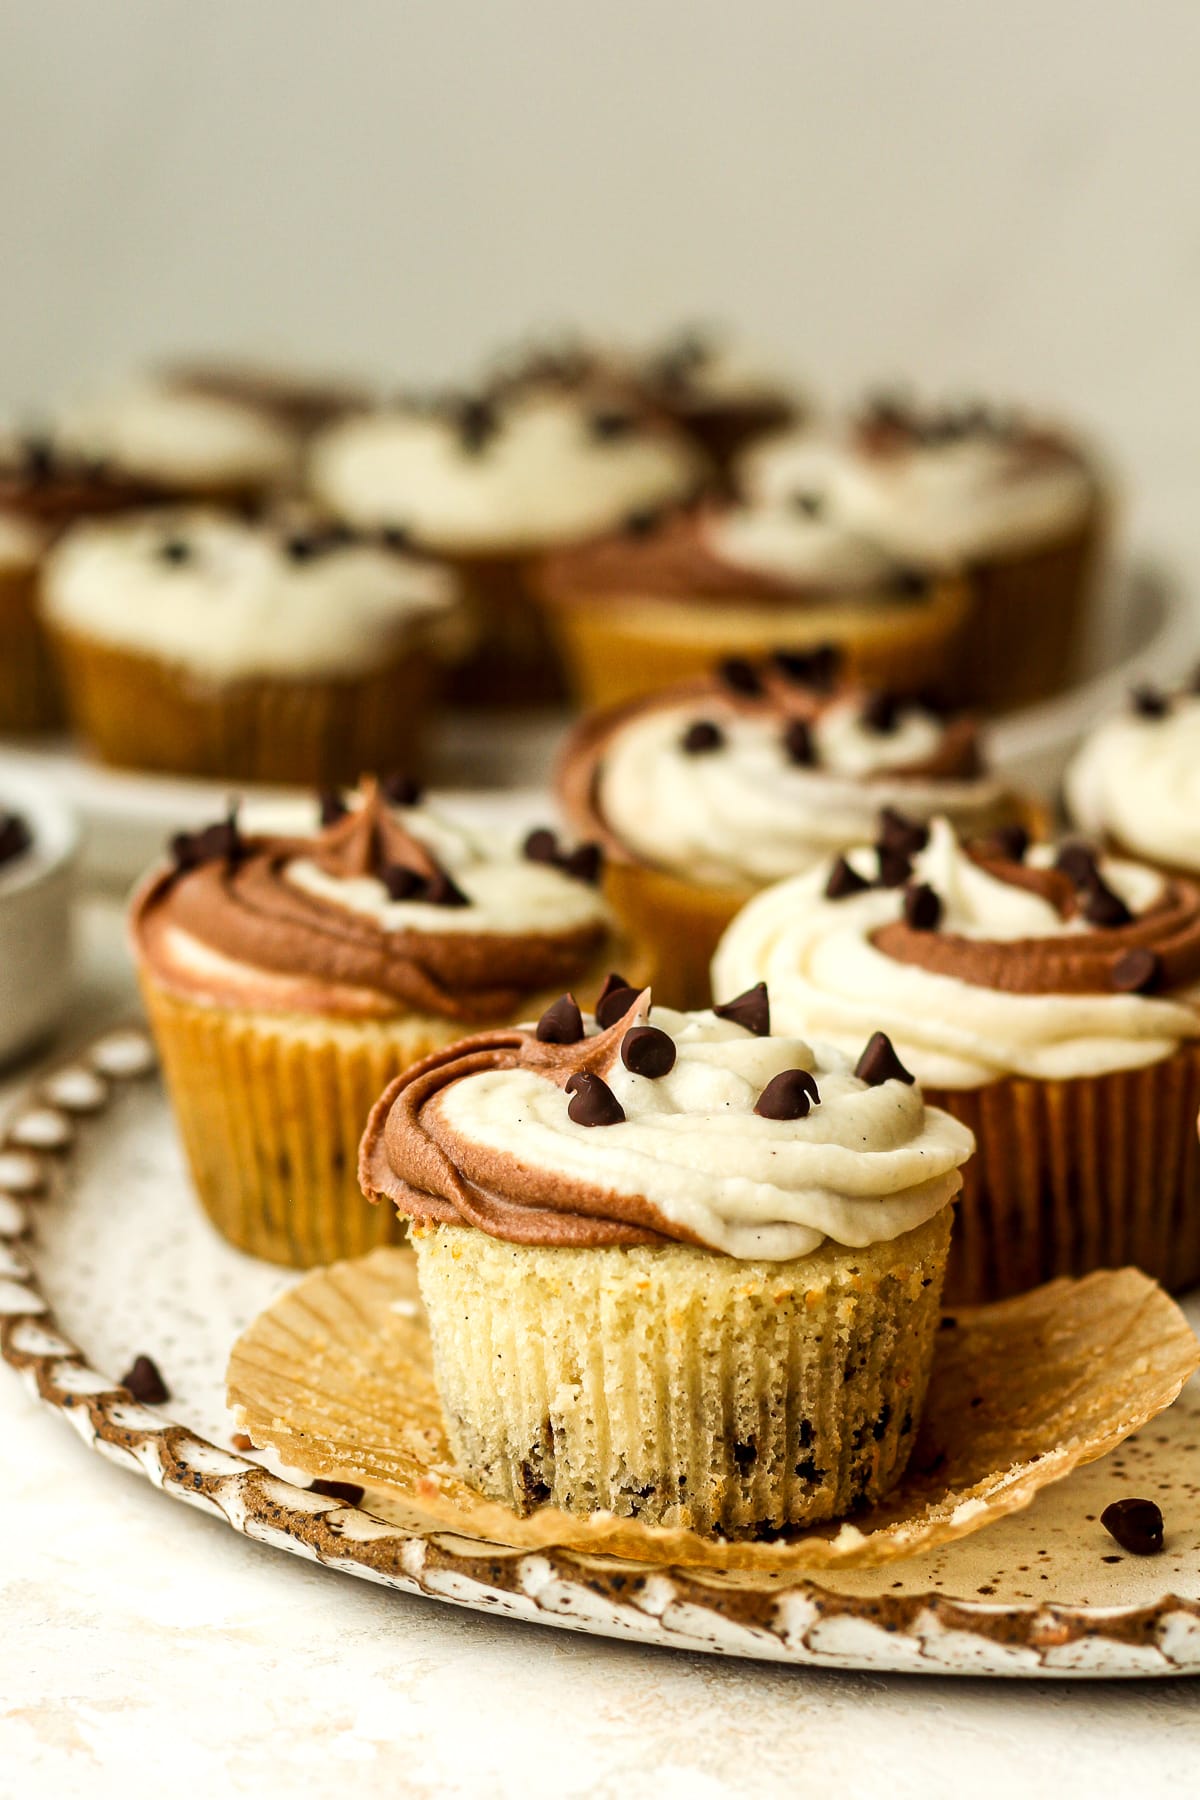 Side view of two plates of cupcakes with mini chocolate chips.